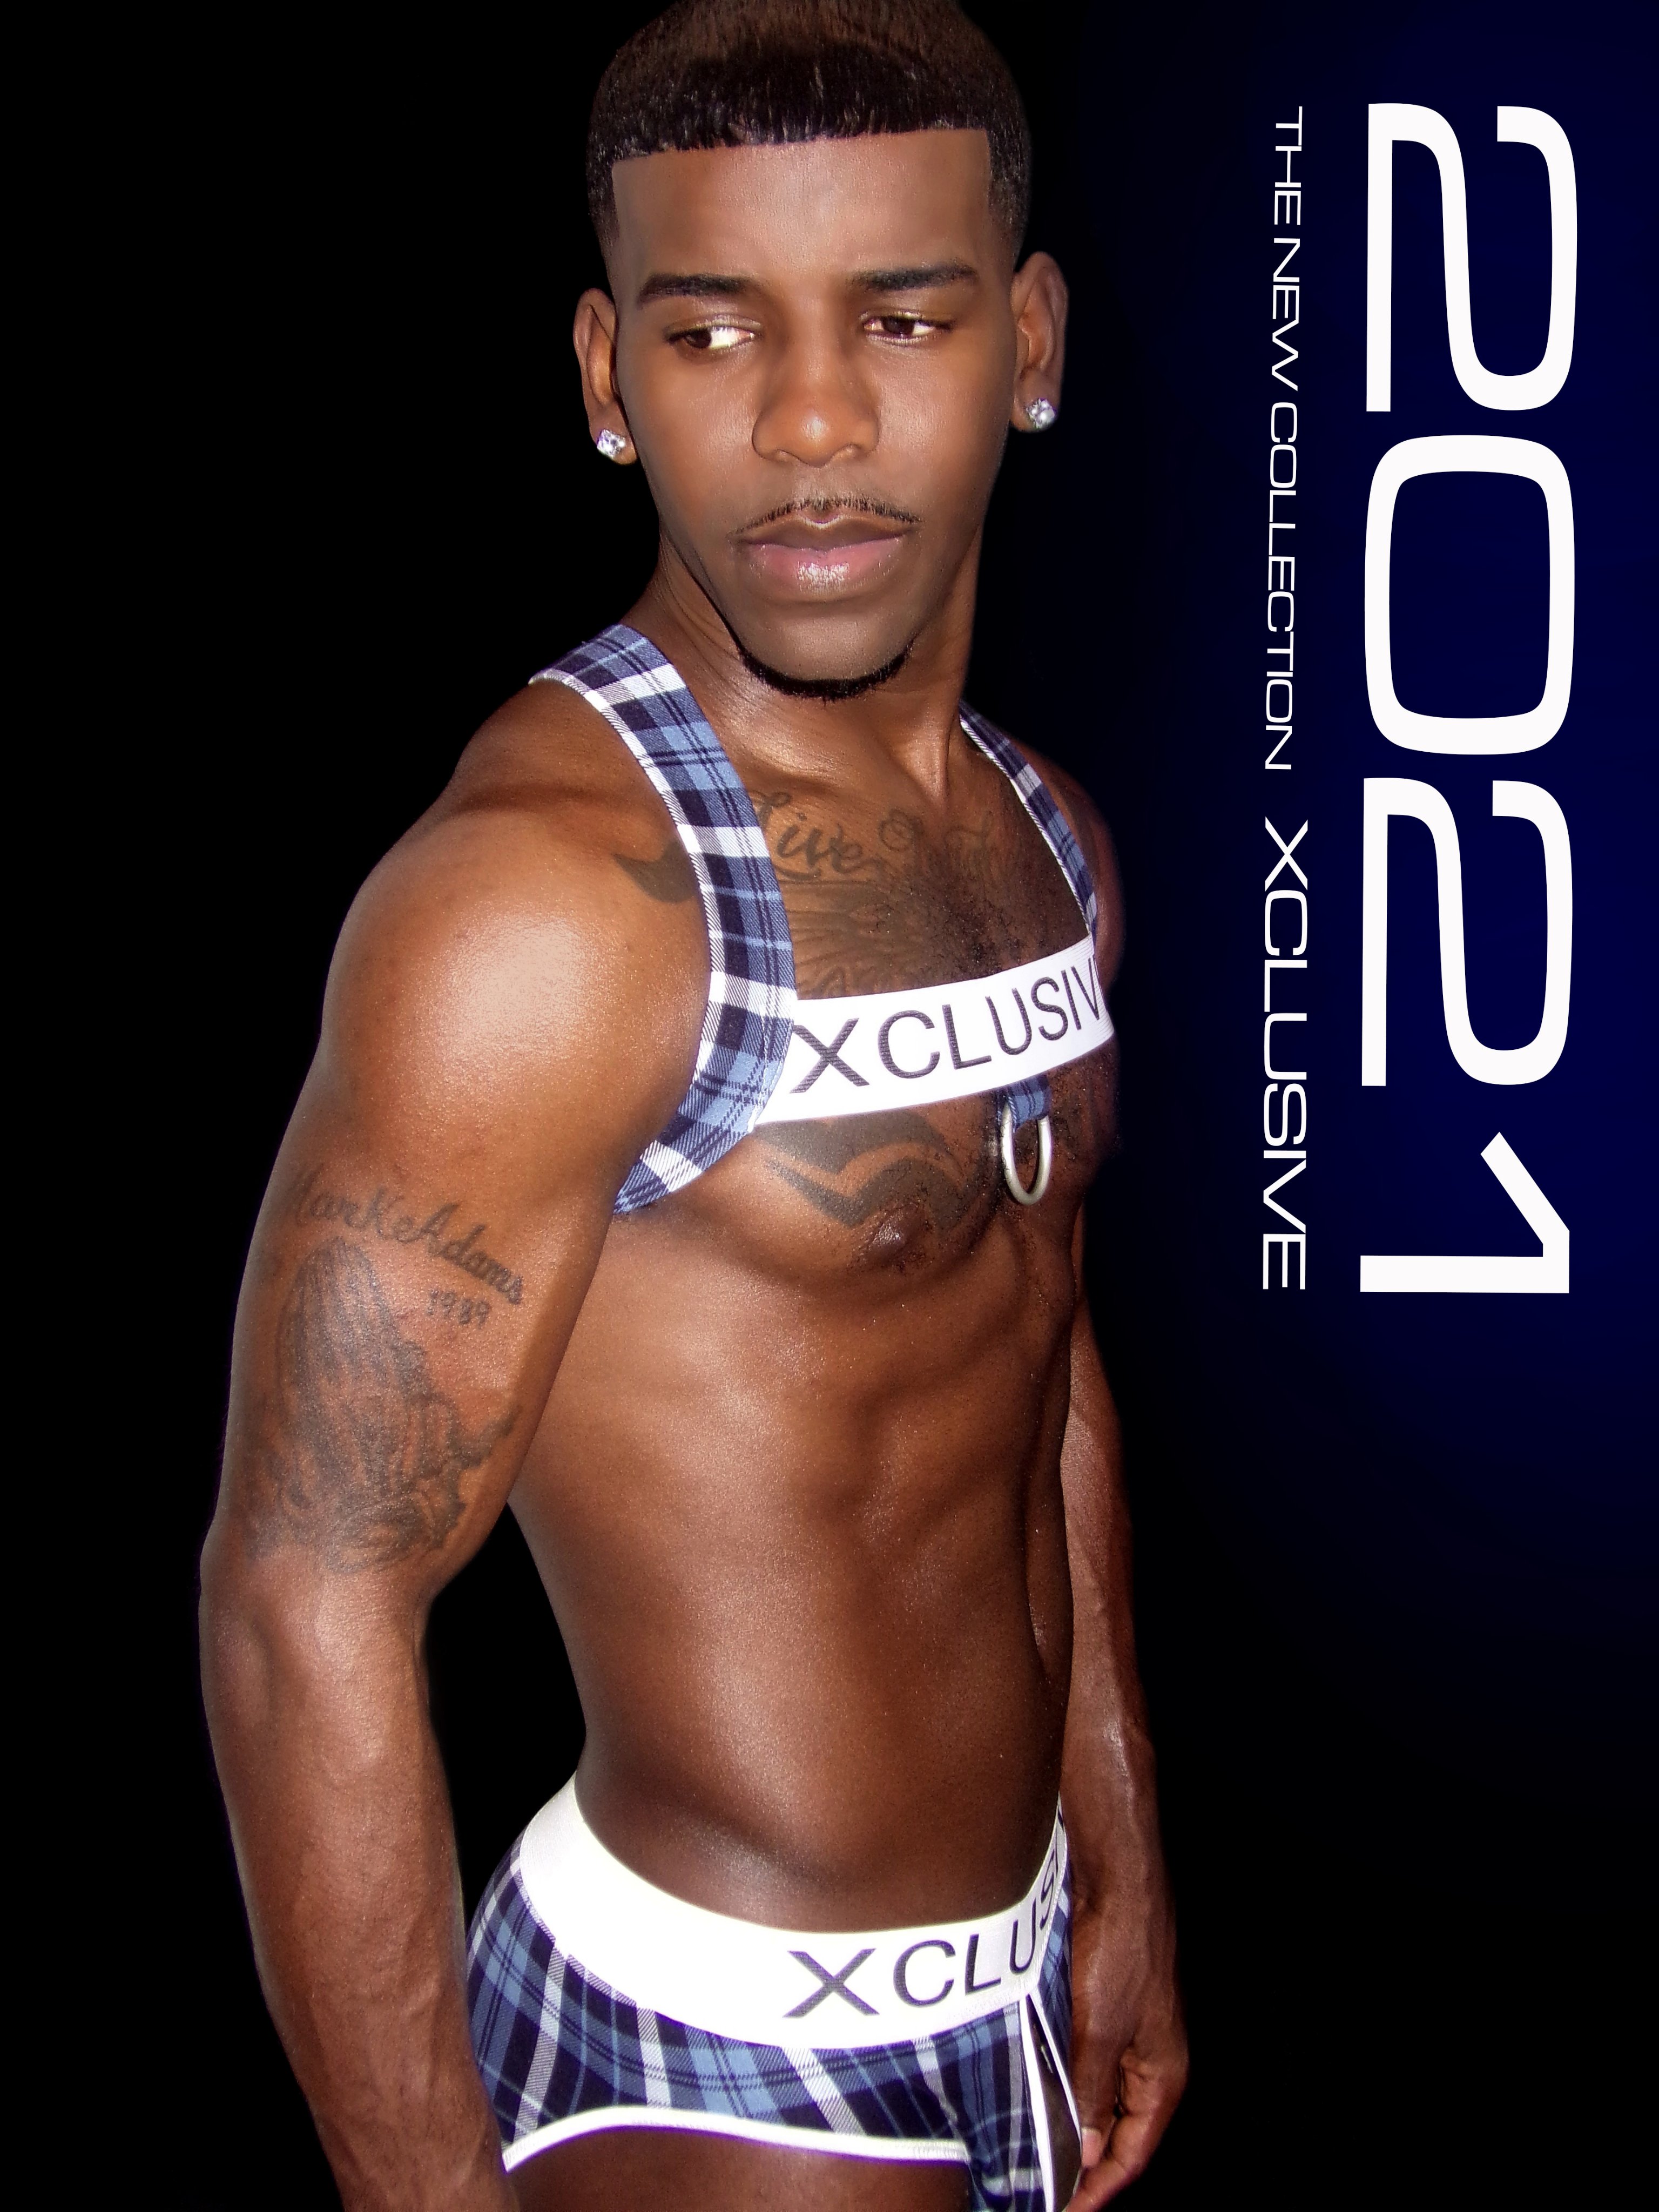 ANTONIO PAOLO SADIO on X: Introducing The Winter Collection; XCLUSIVE 2021  By, @xclusive002 ~ EASY ACCESS UNDERWEAR w/Matching Ring Harness, $50 plus  shipping. The Sexiest Underwear from The Sexiest barber in Town!